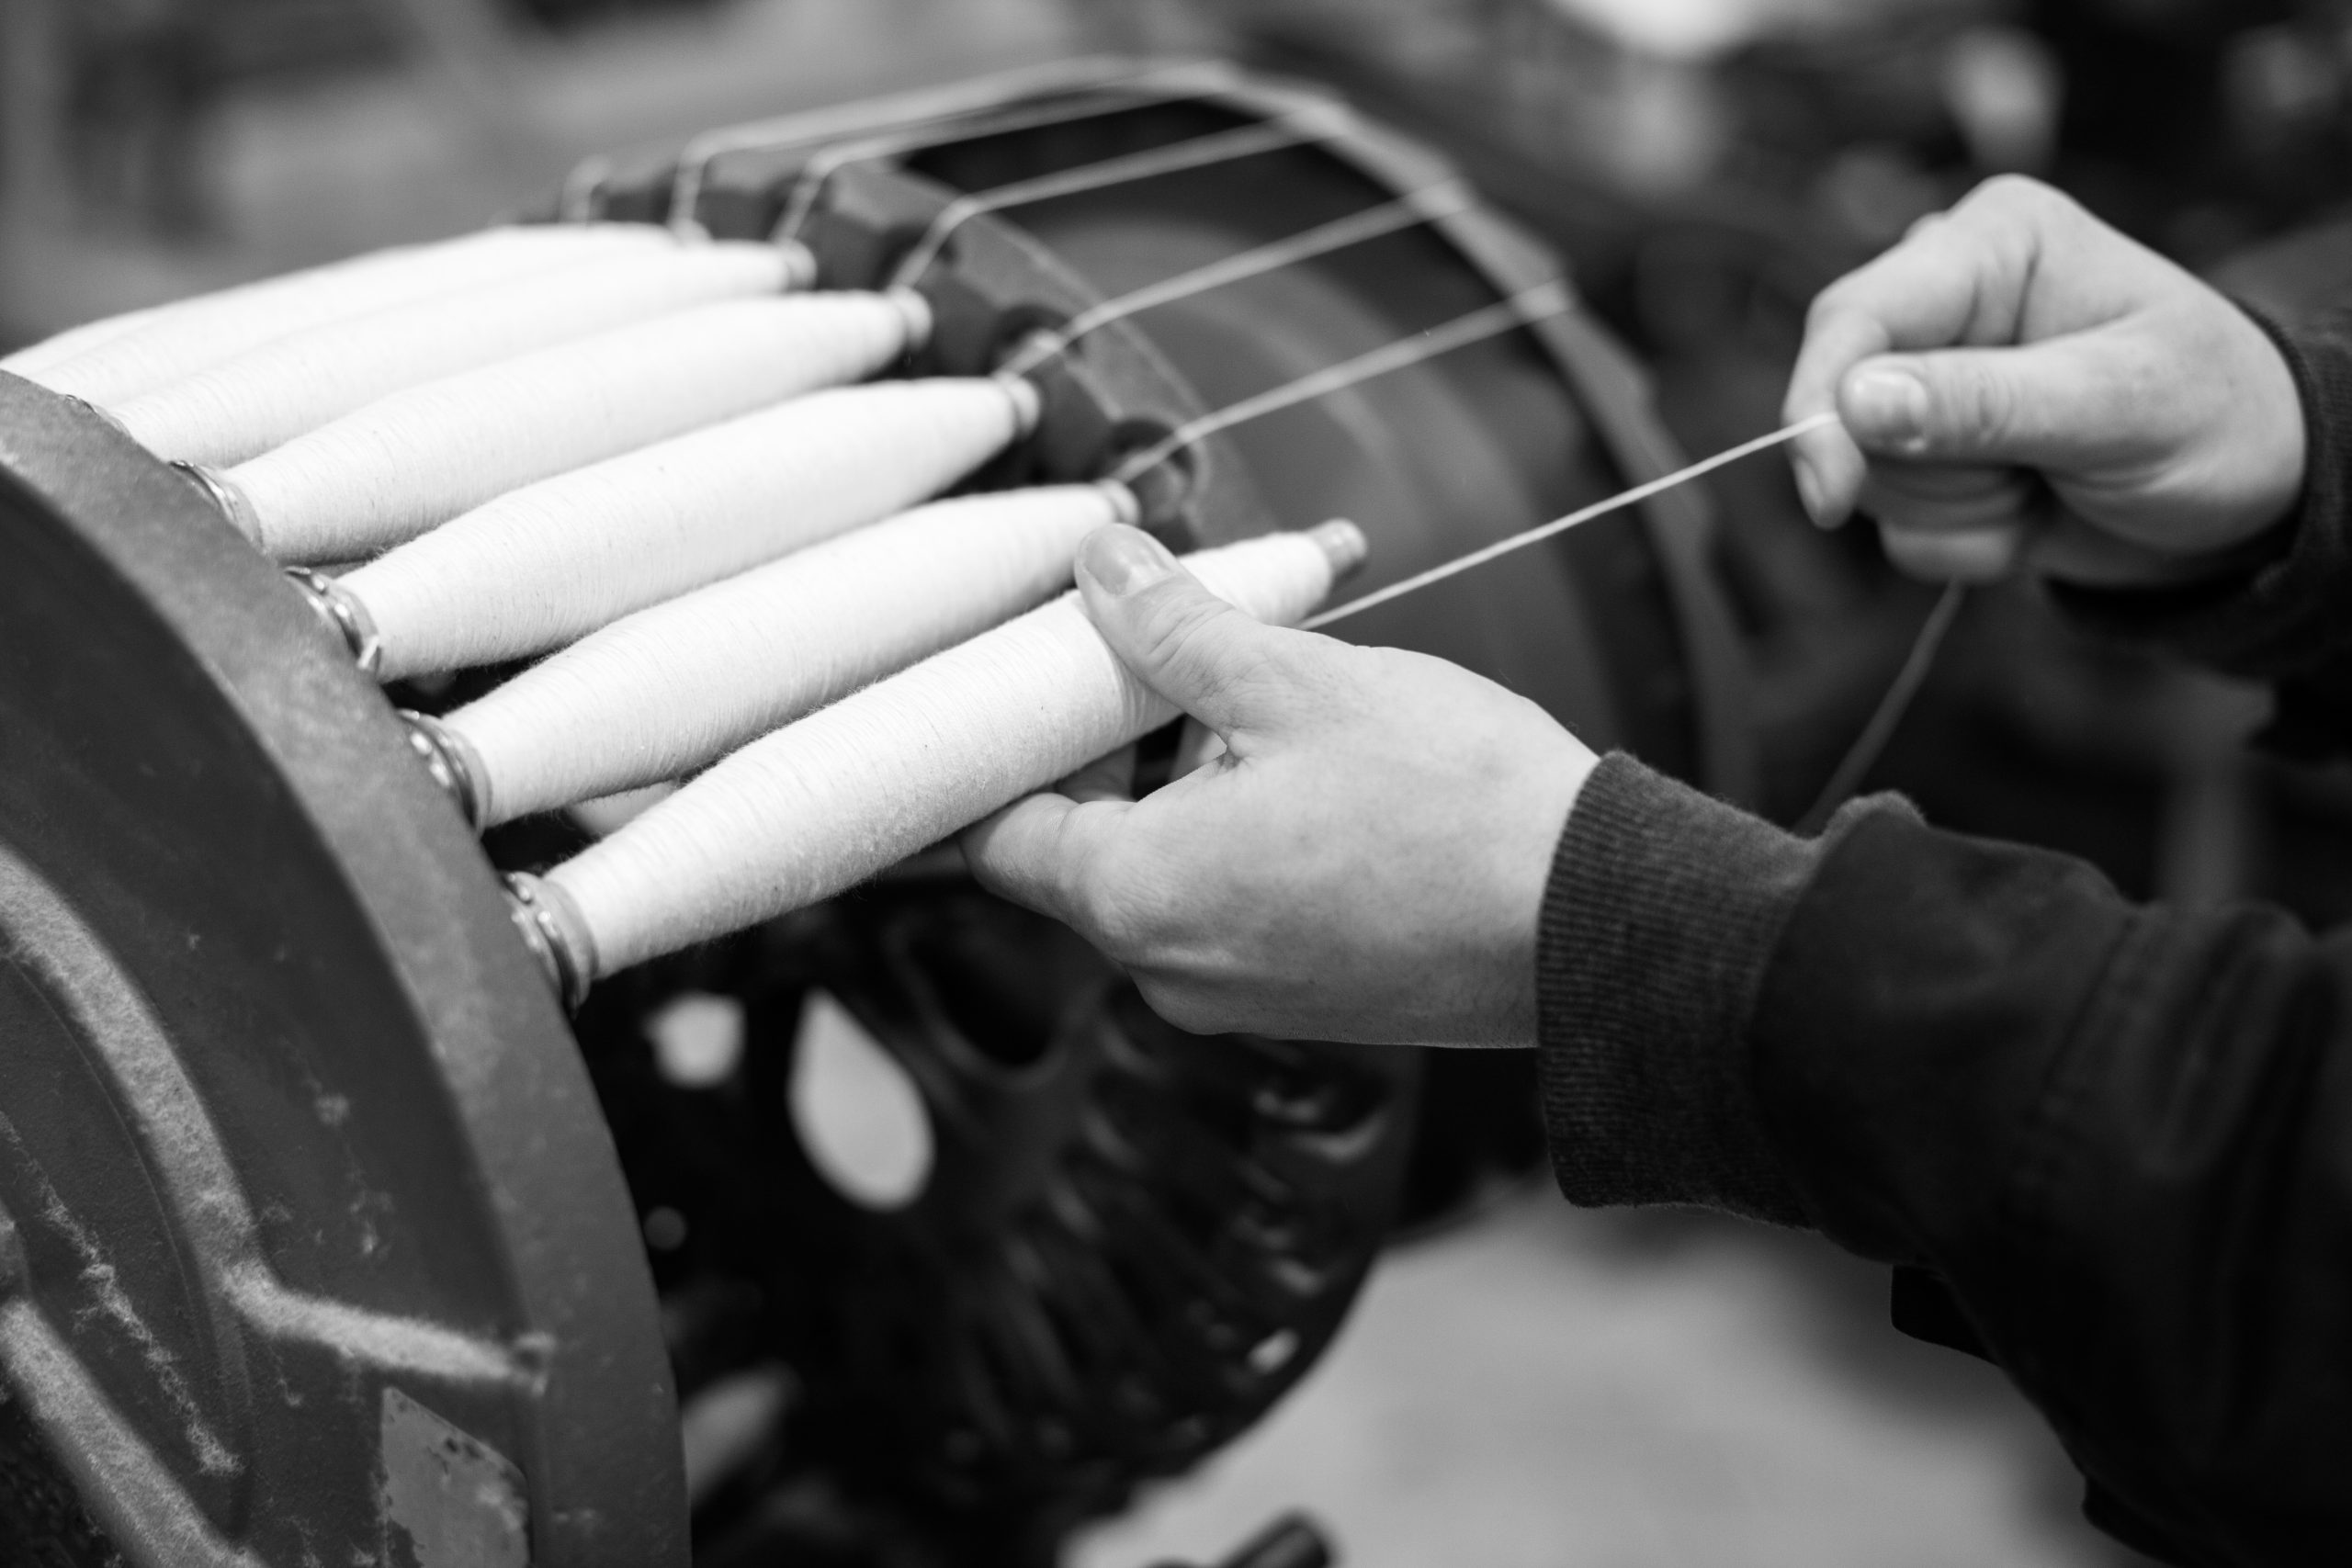 black and white photo craftsman hands working with shuttle loom bobbins wound with white cotton yarn